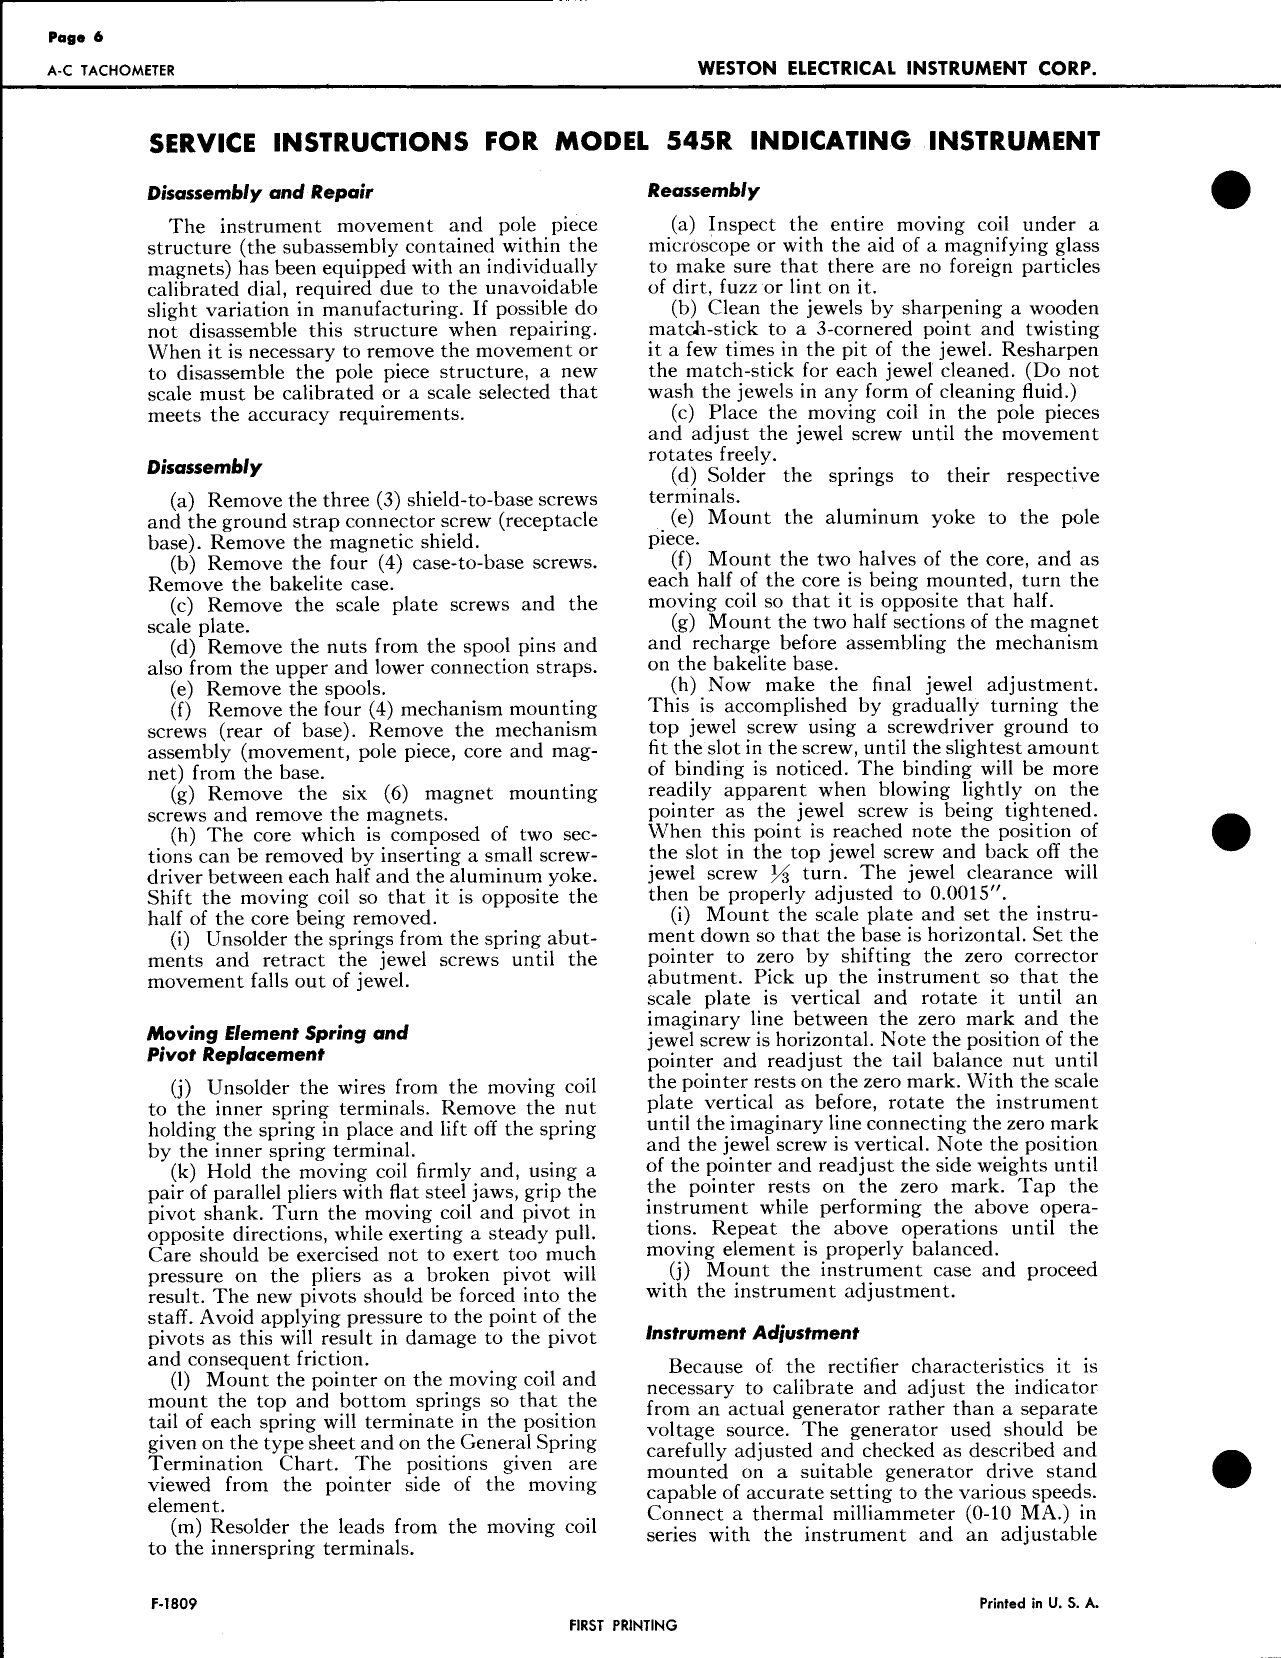 Sample page 6 from AirCorps Library document: Service Instructions for A-C Tachometer Model 752 Mag & 545R Indicator